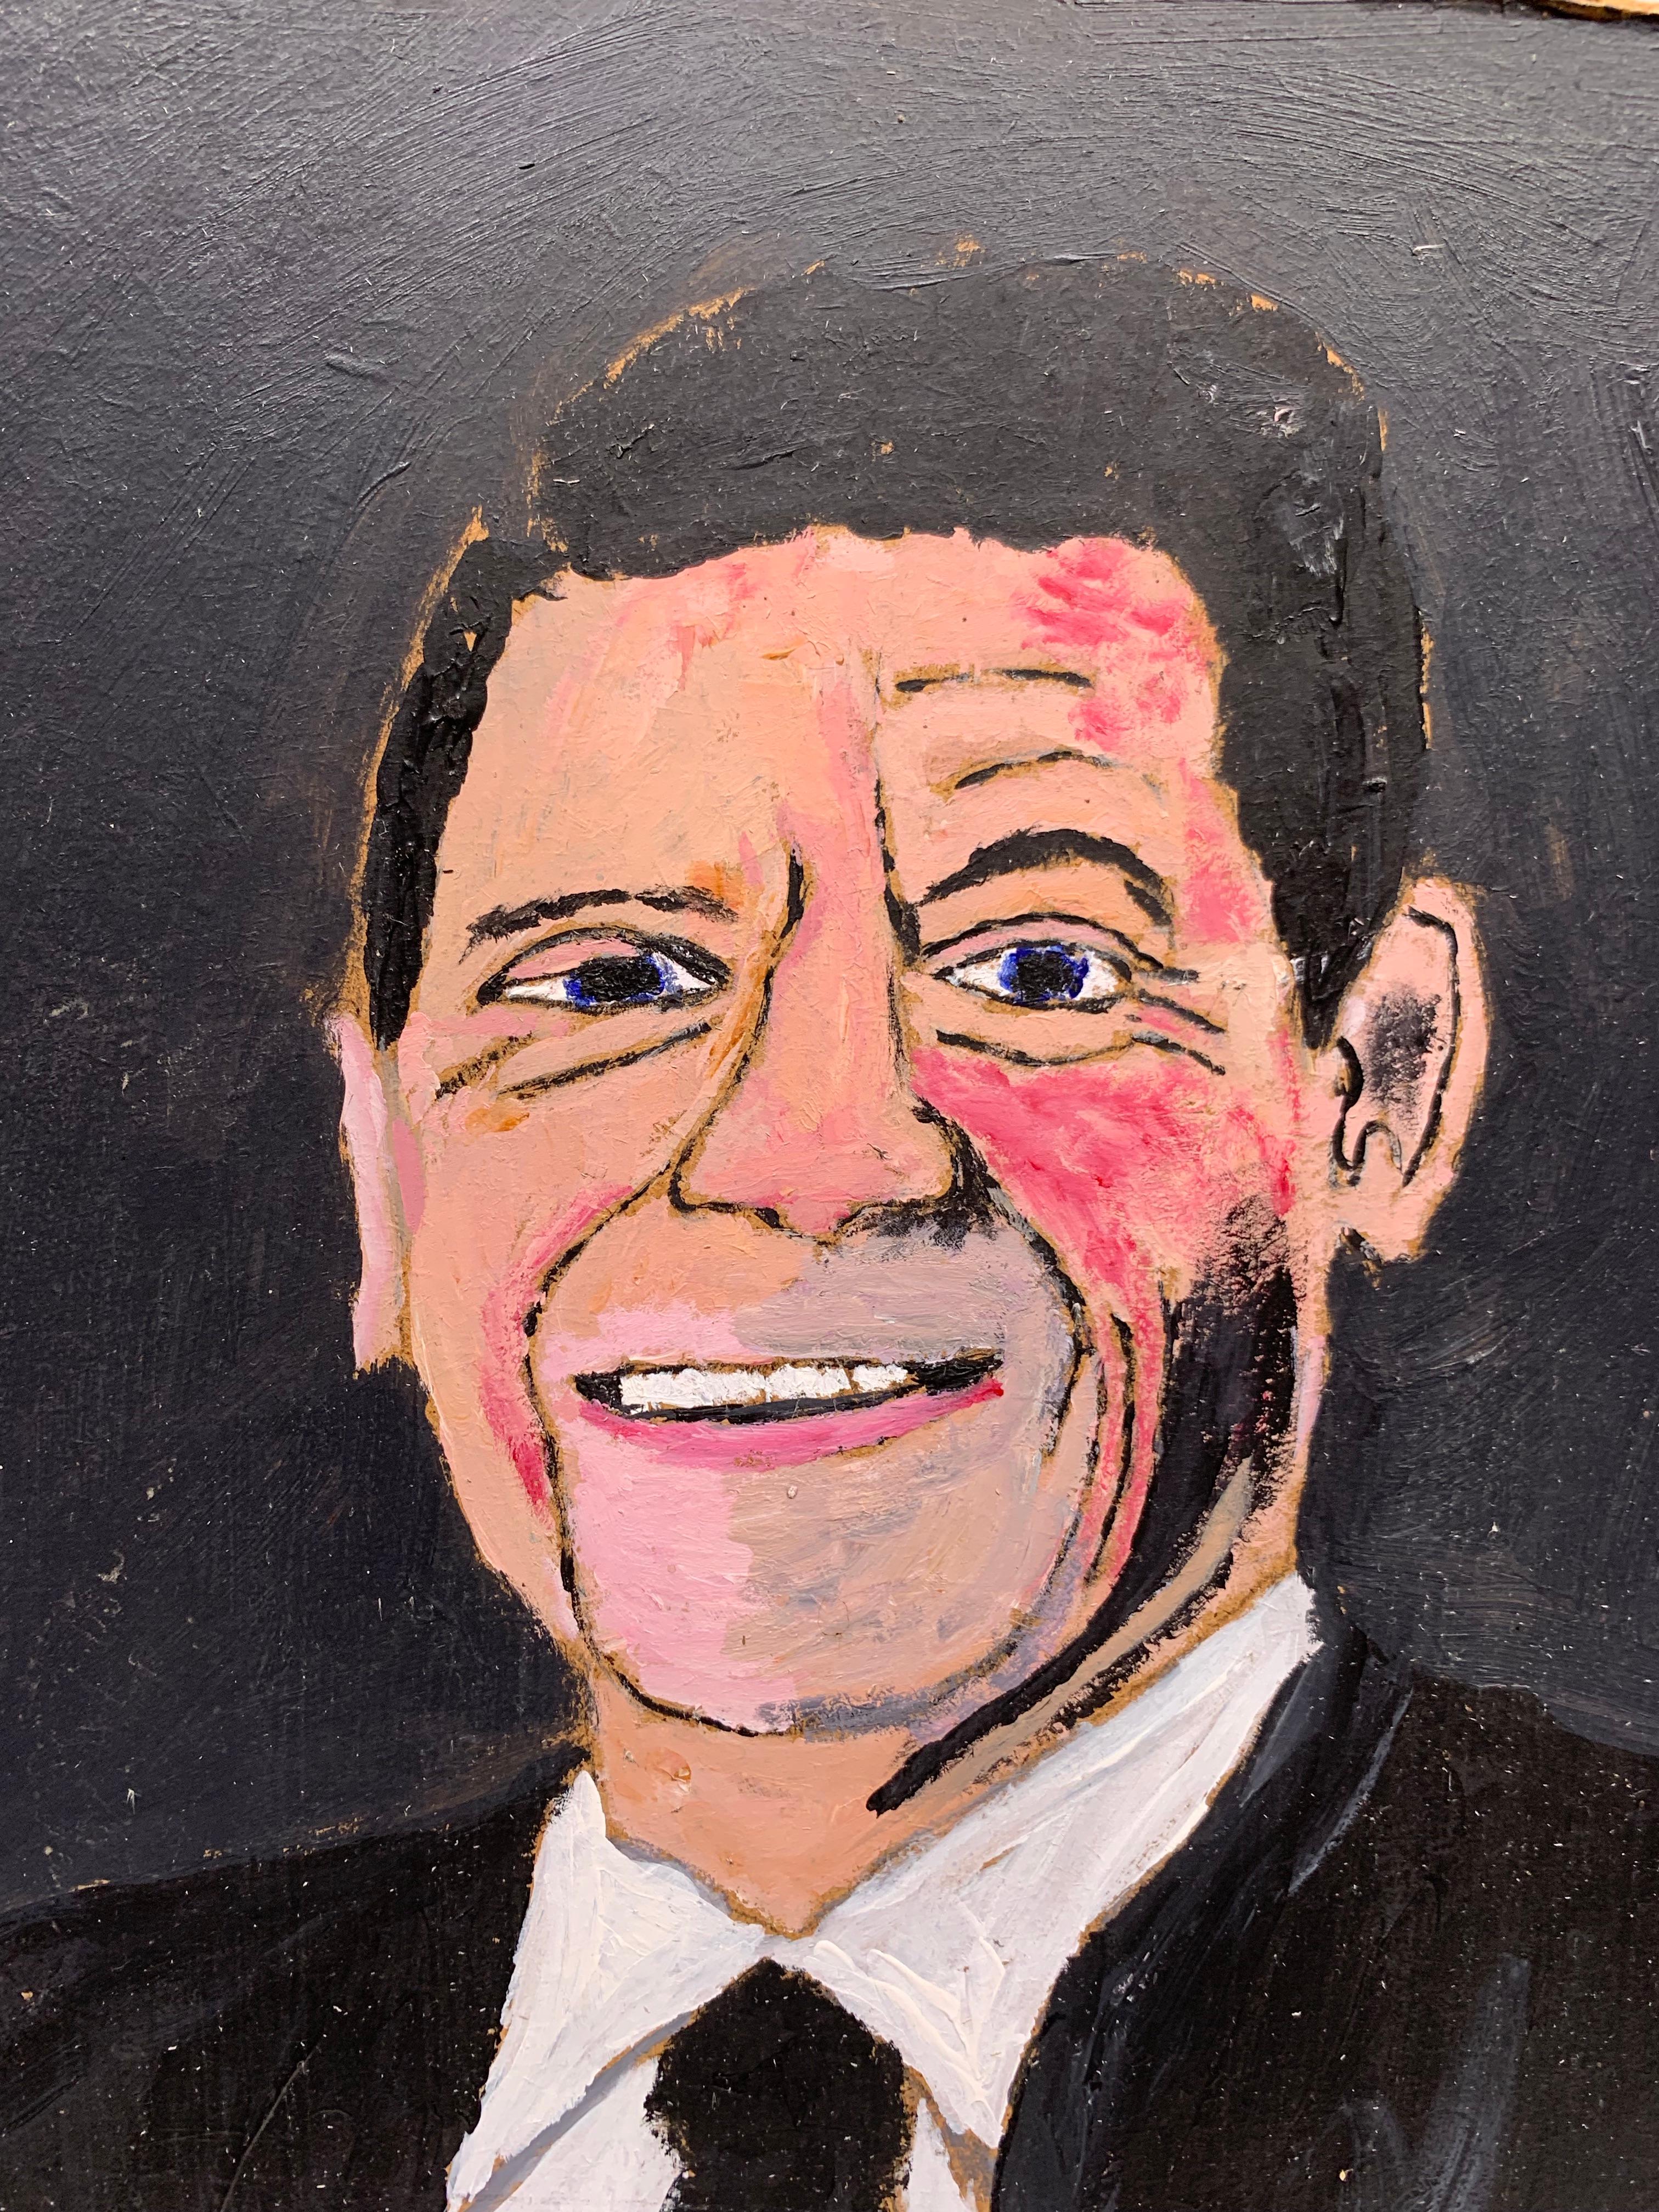 Portrait of Ronald Reagan - Painting by Earl Swanigan